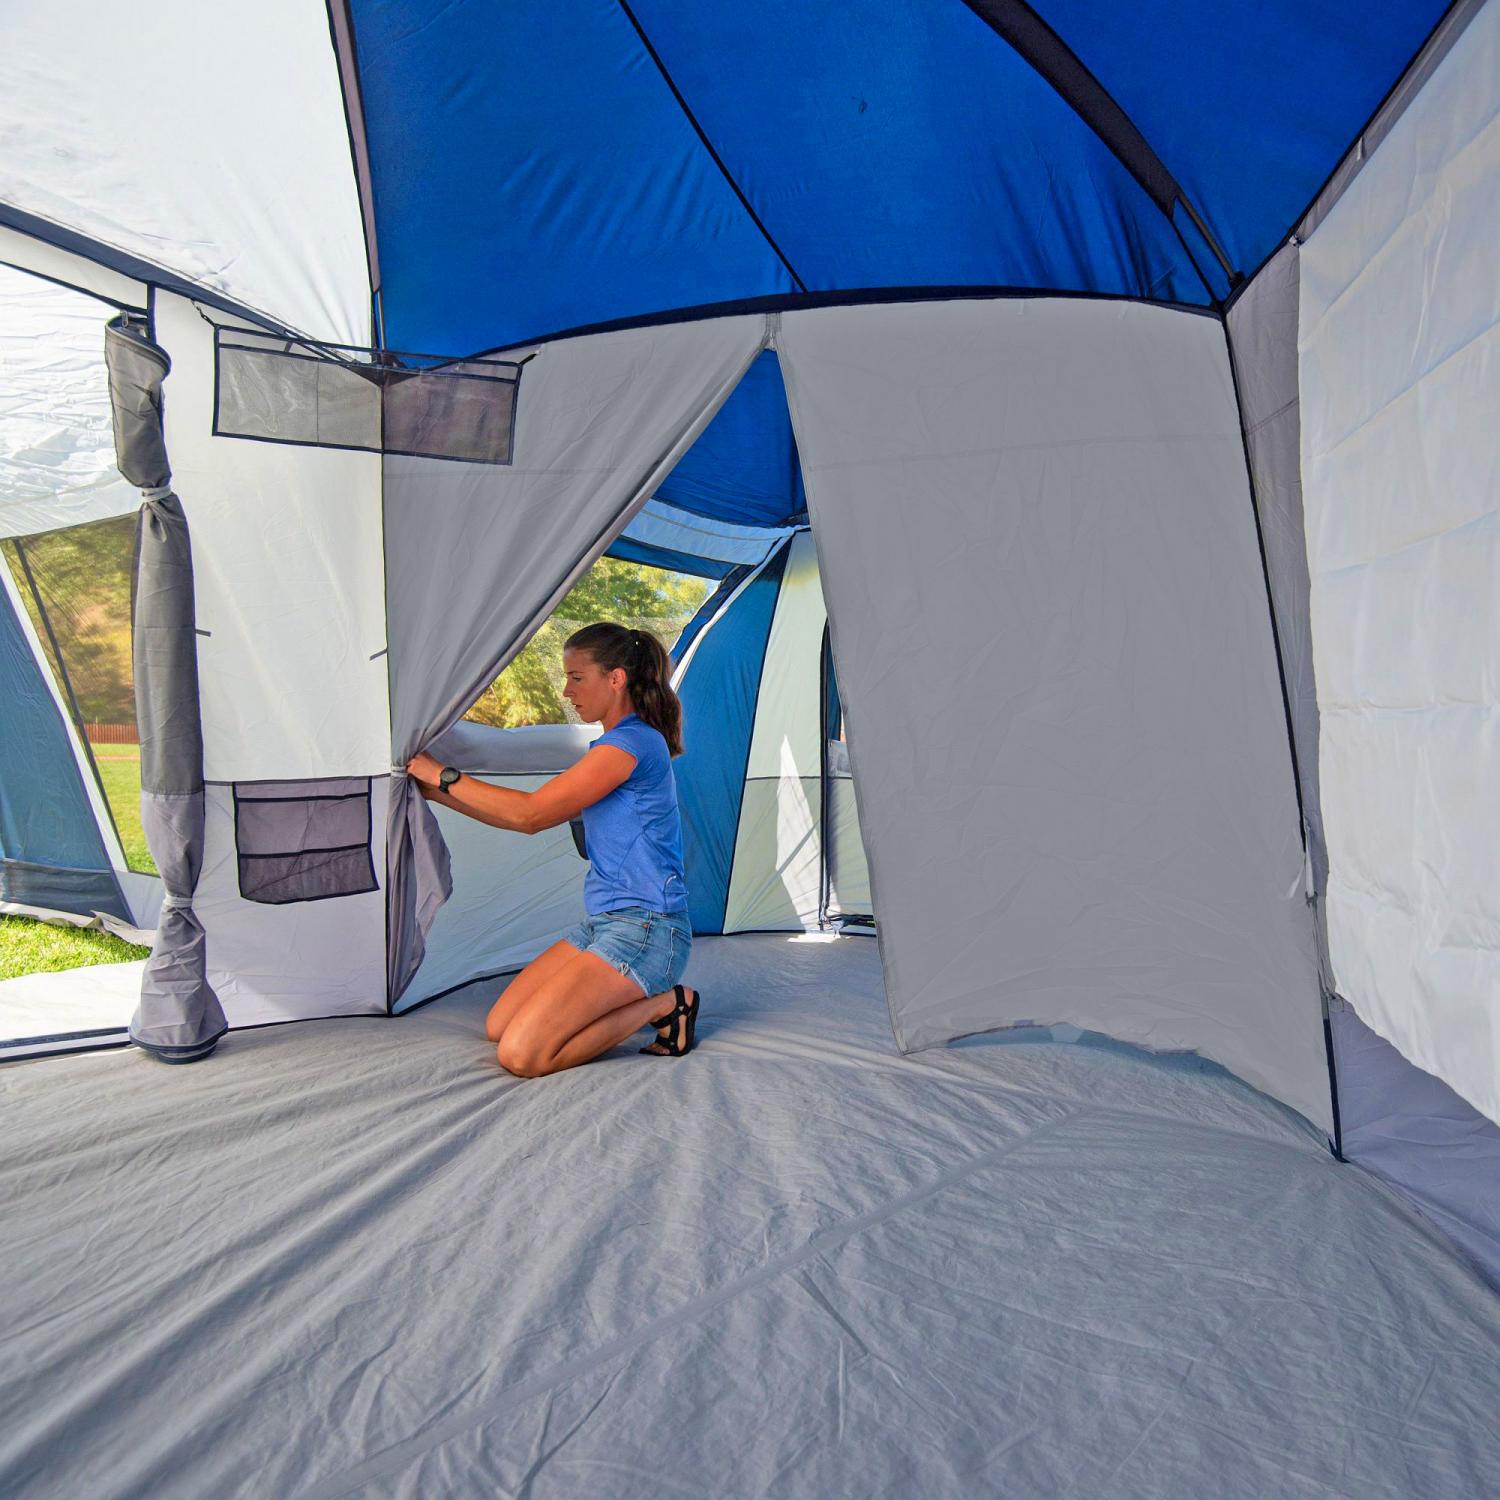 Giant 20-Person Tent With 5 Bedroom Compartments